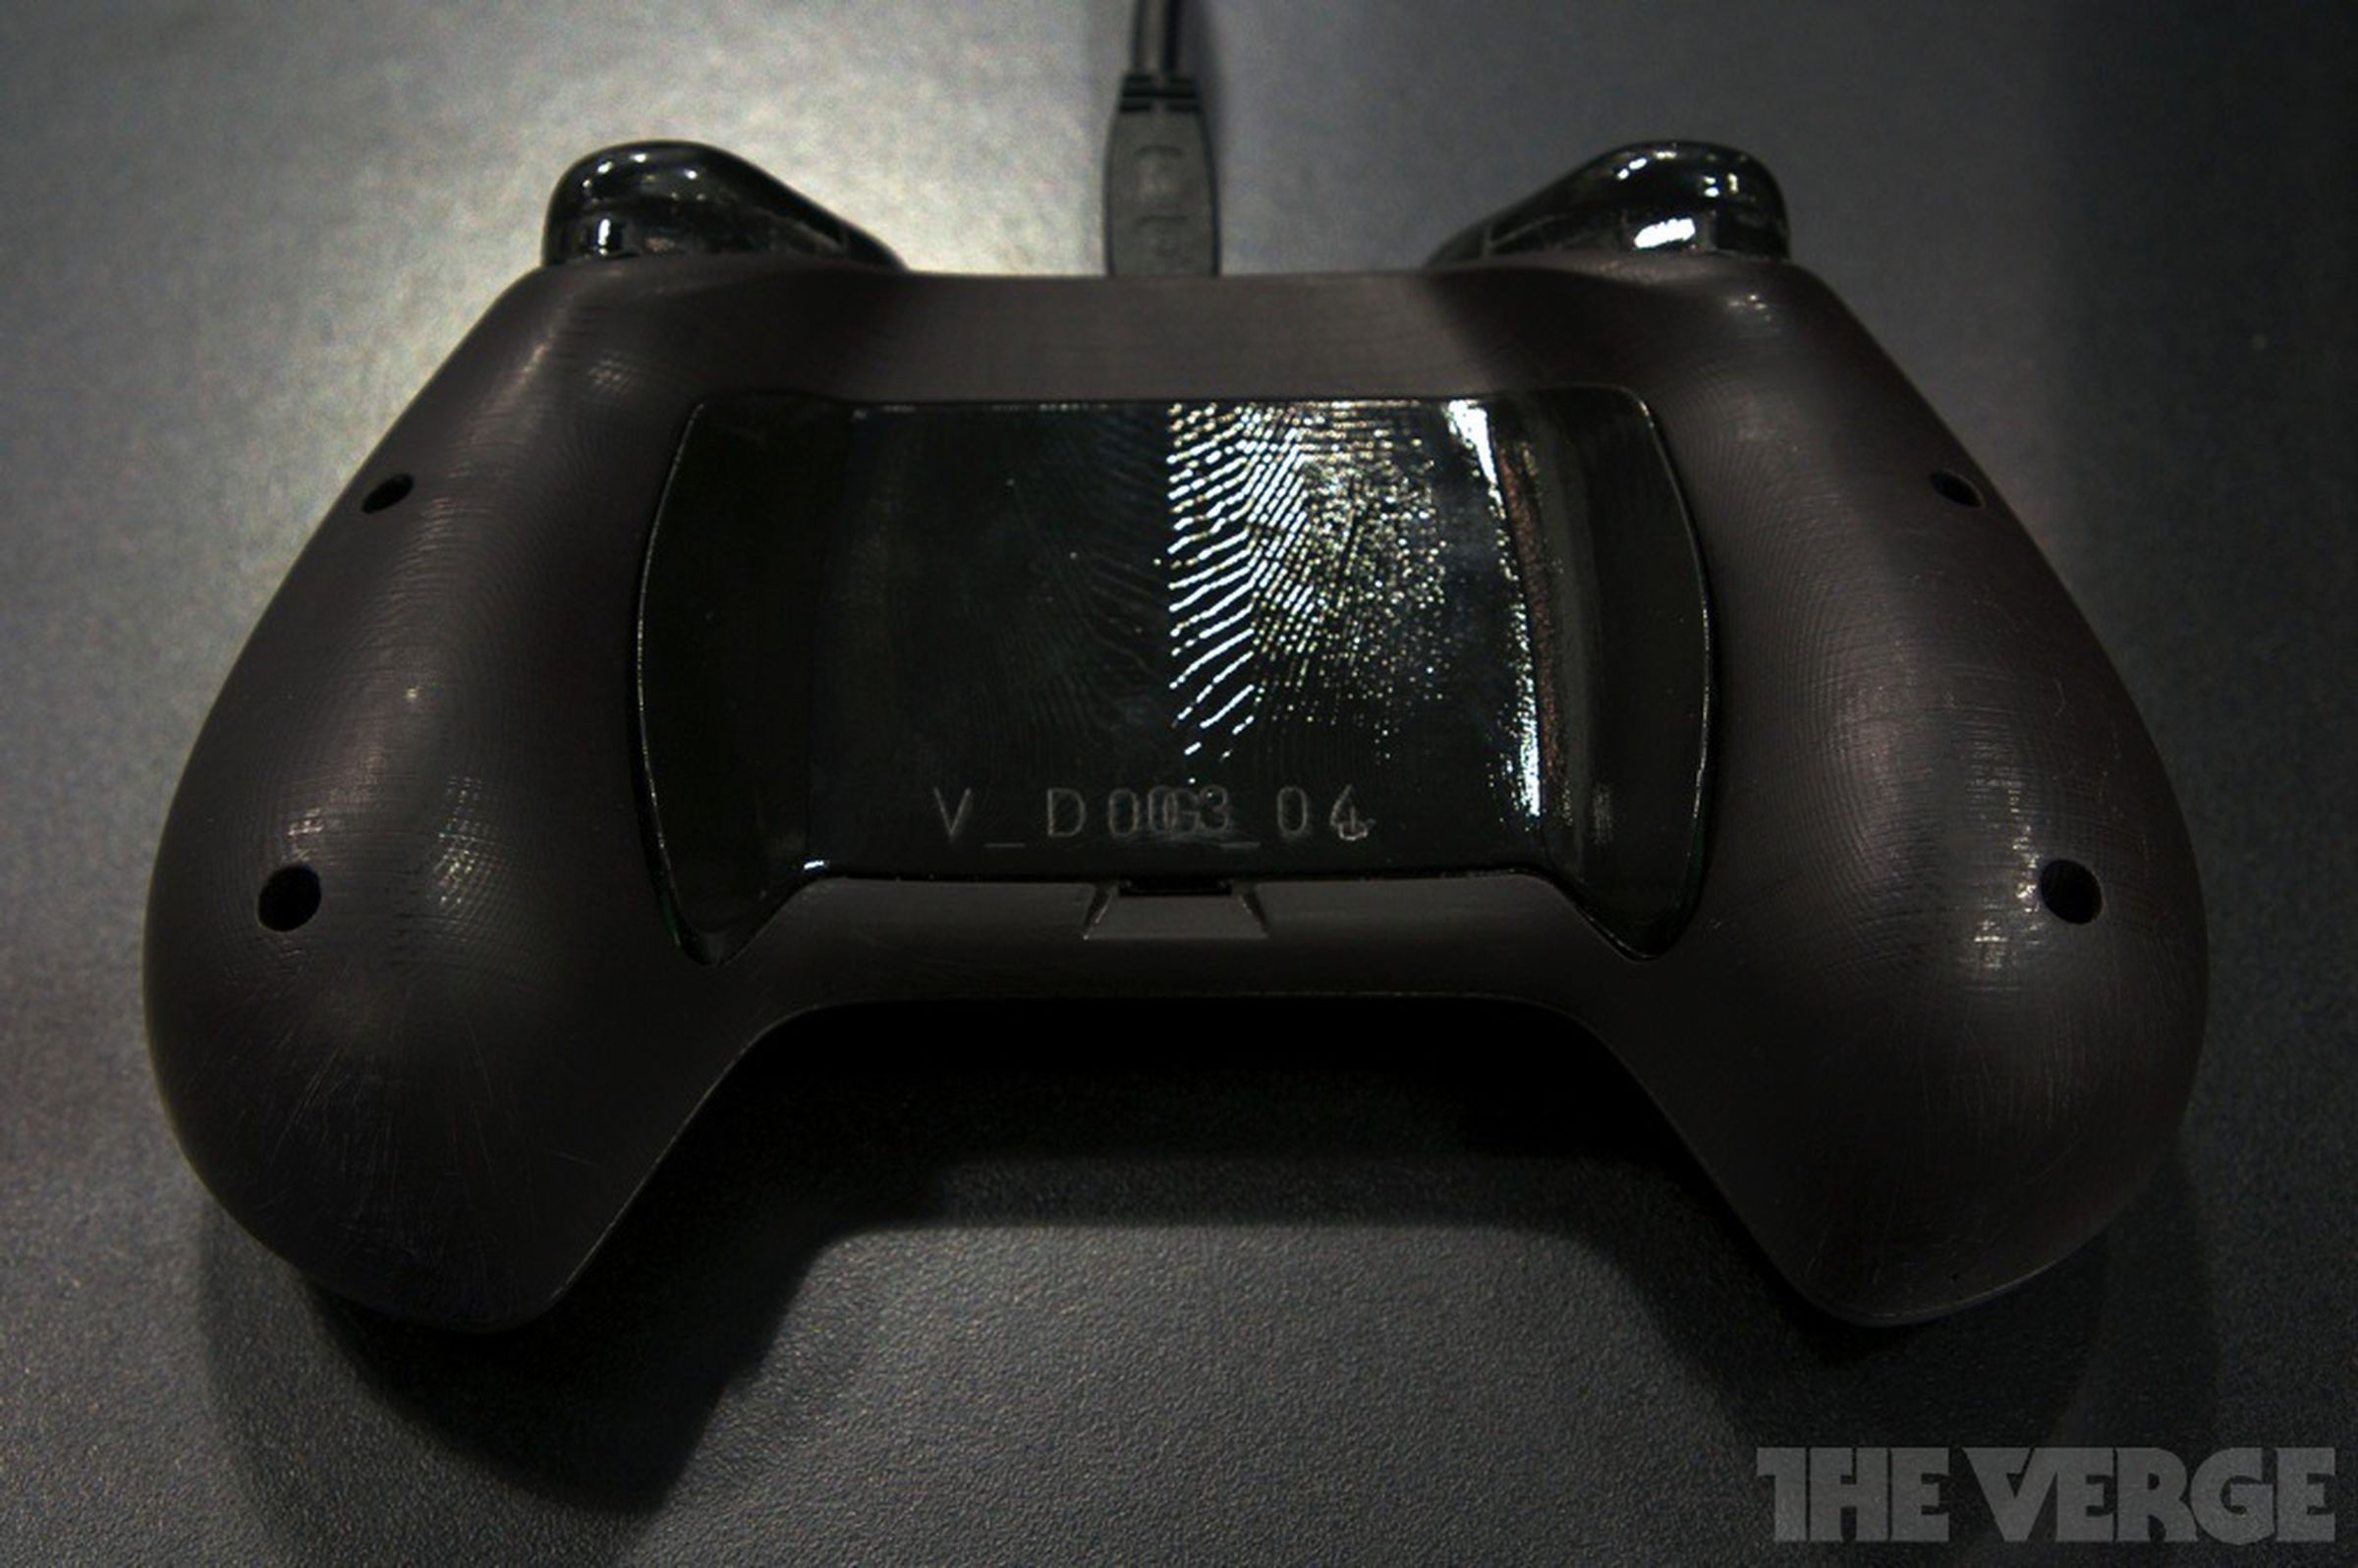 Steam Controller prototype hands-on photos